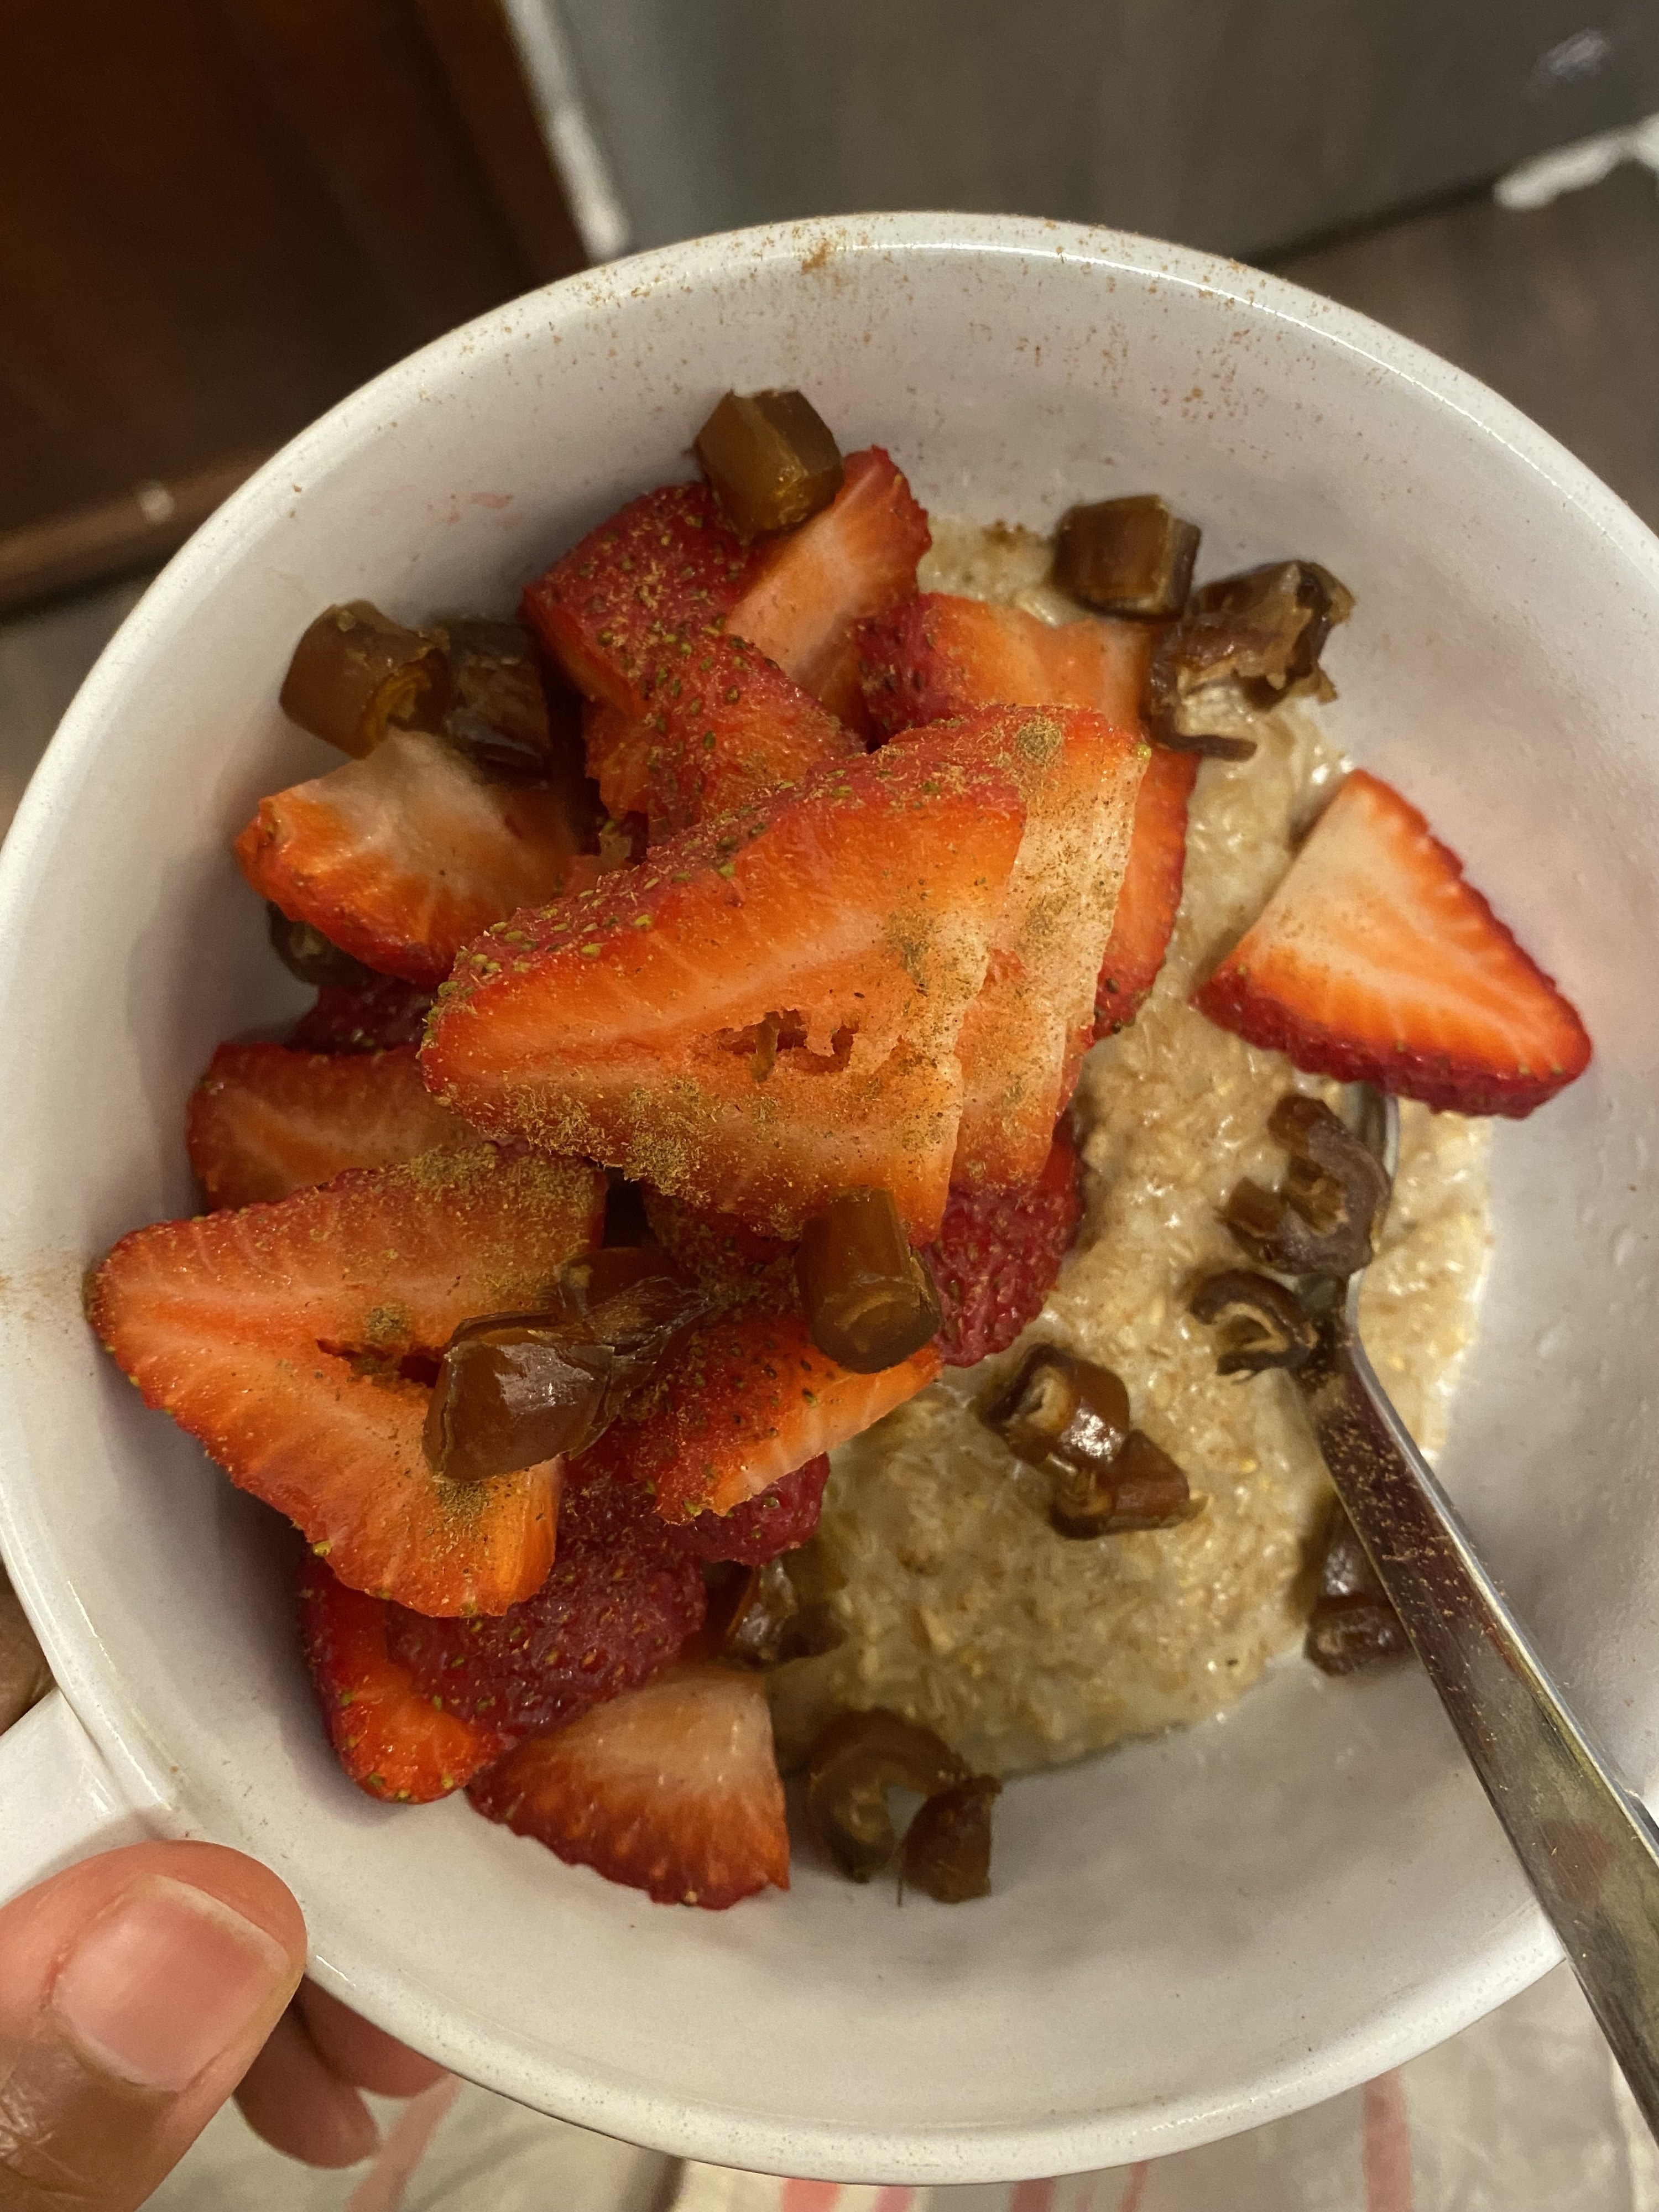 Bowl of oatmeal with strawberries and dates